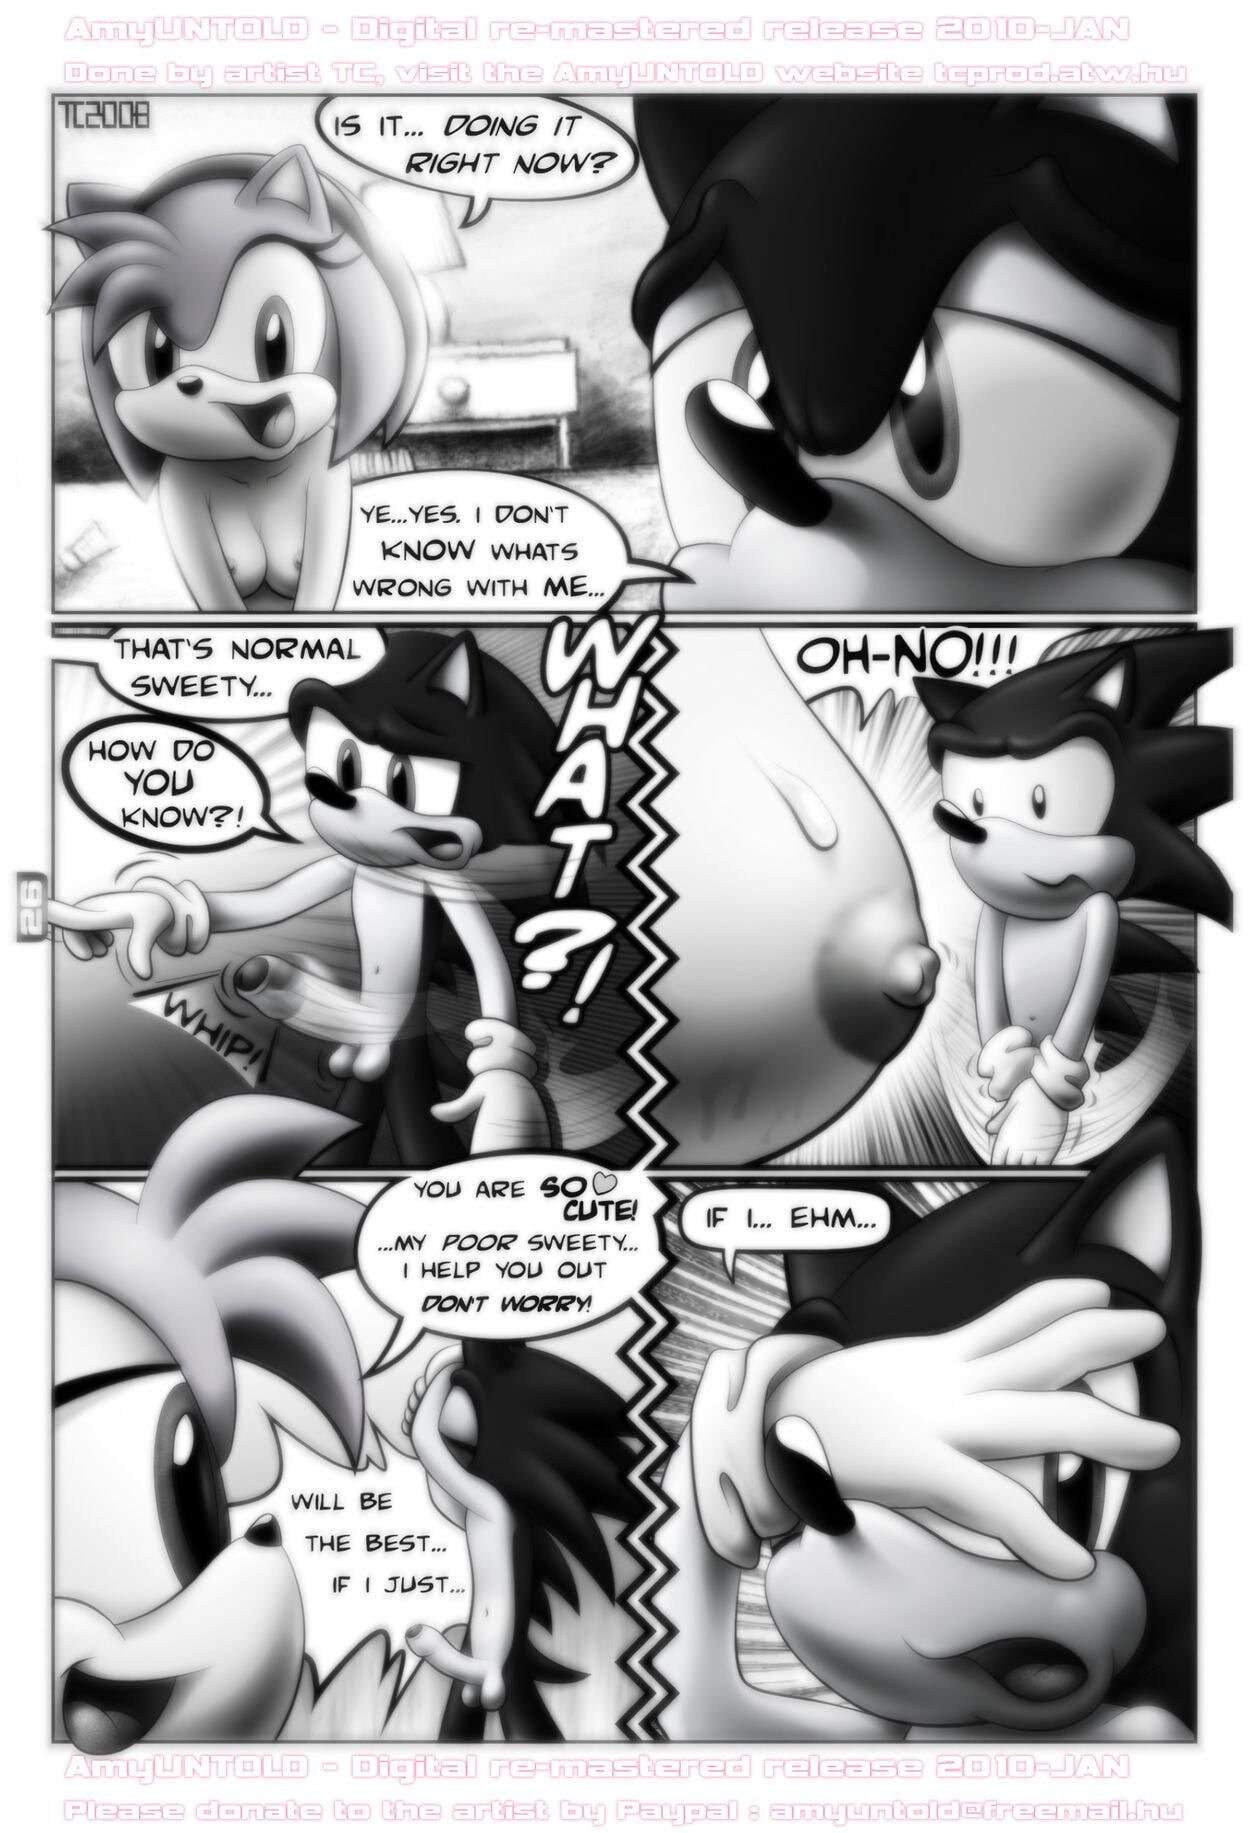 Amy Untold - Finally - Page 26